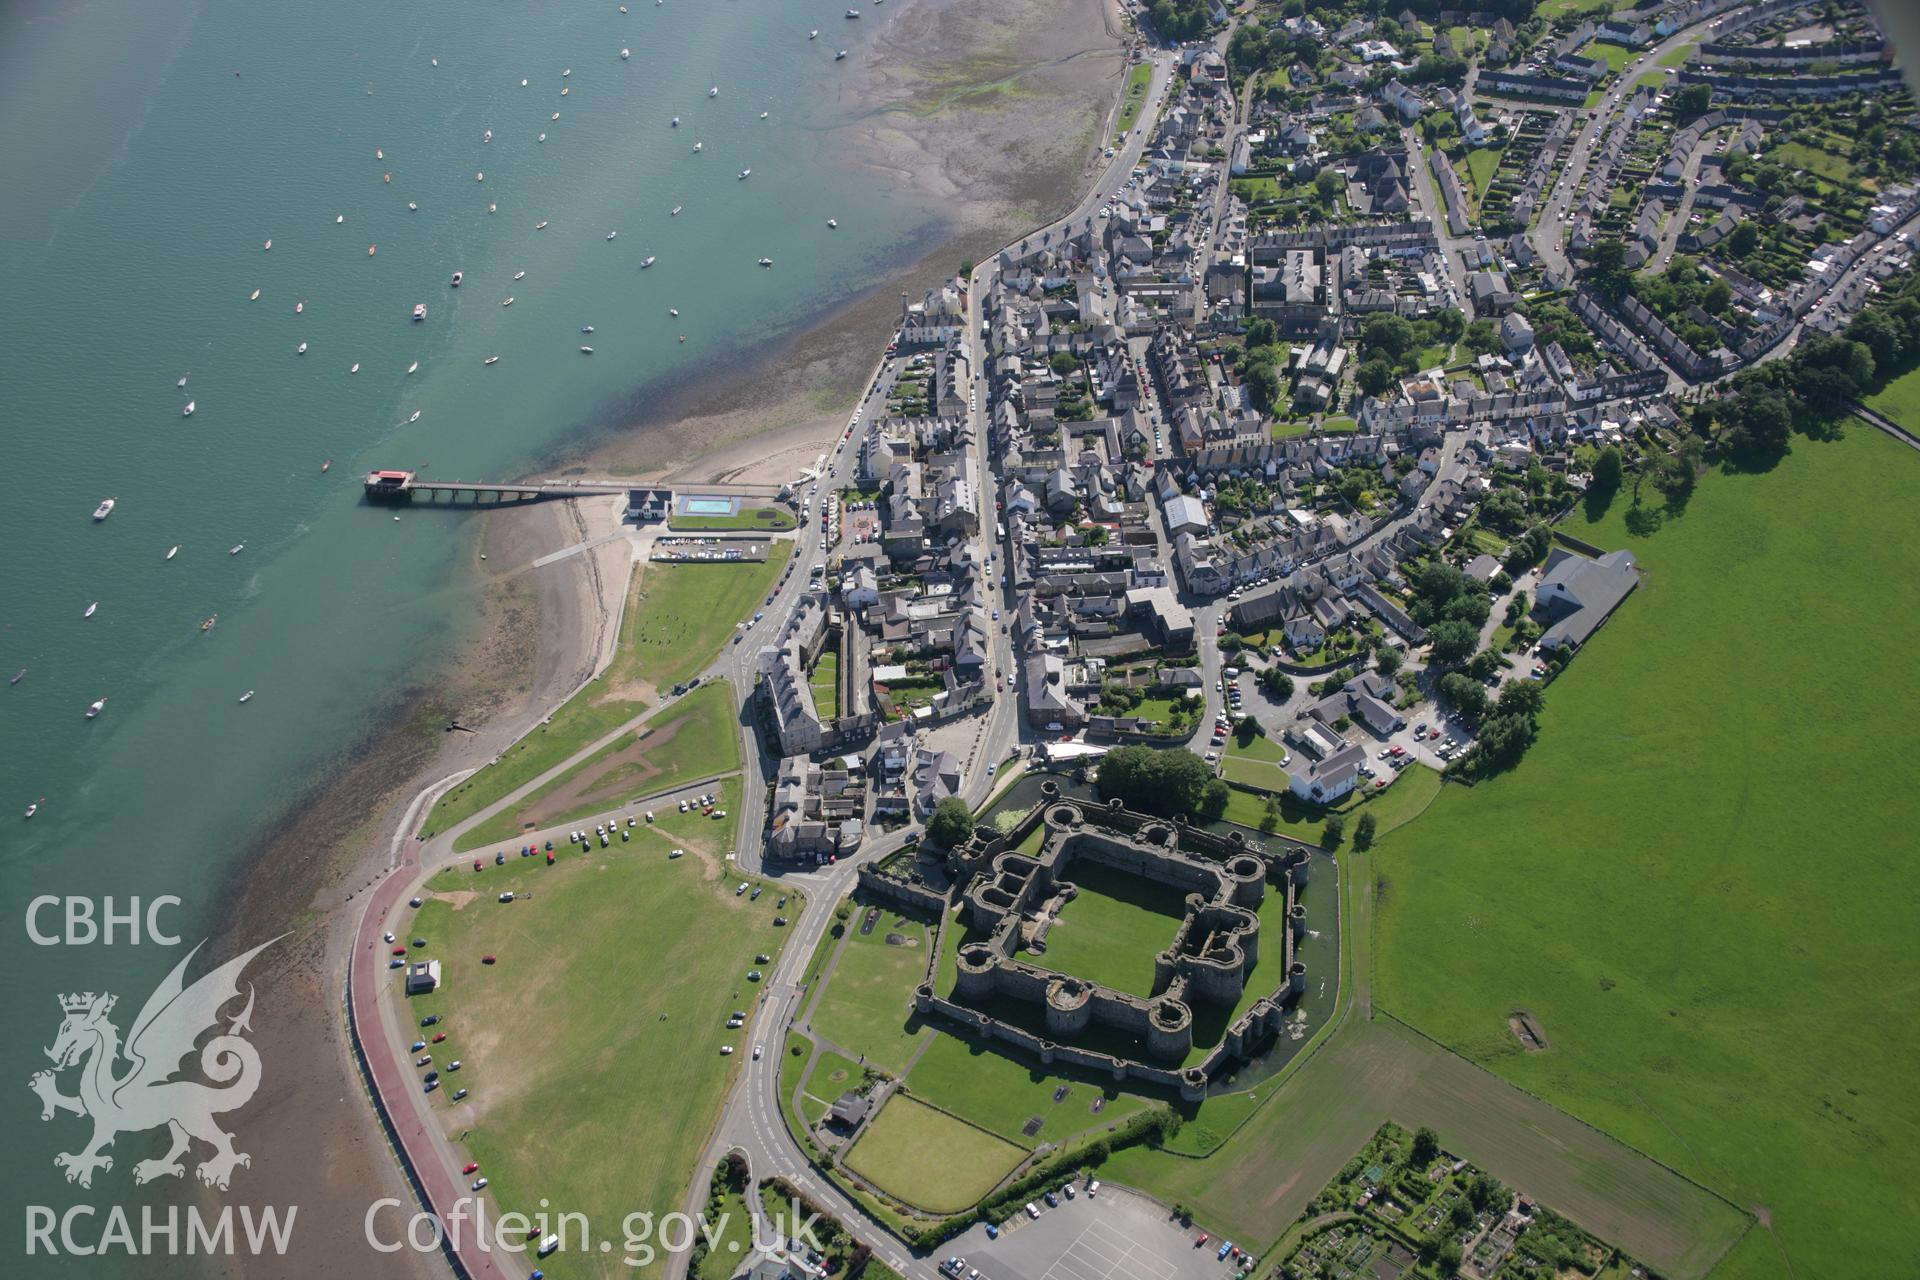 RCAHMW colour oblique aerial photograph of Beaumaris Castle and the town from the north-east. Taken on 14 June 2006 by Toby Driver.